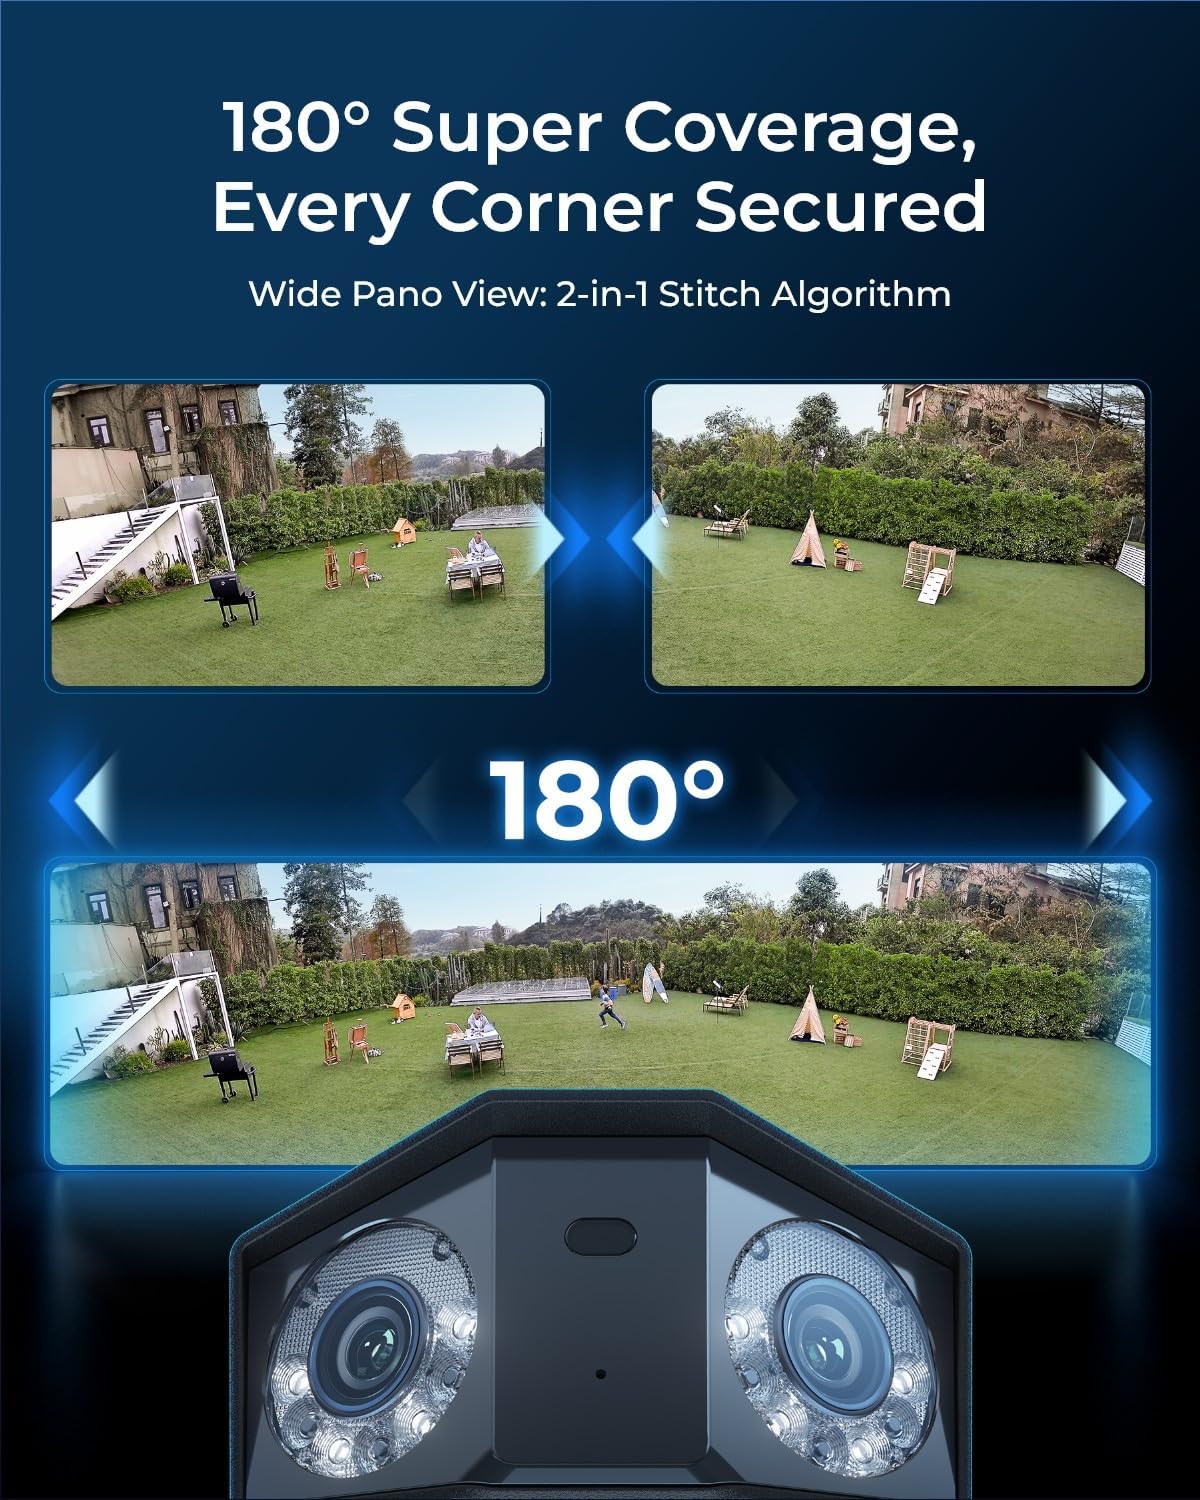 UHD Dual-Lens PoE Security Camera with 180° Panoramic View